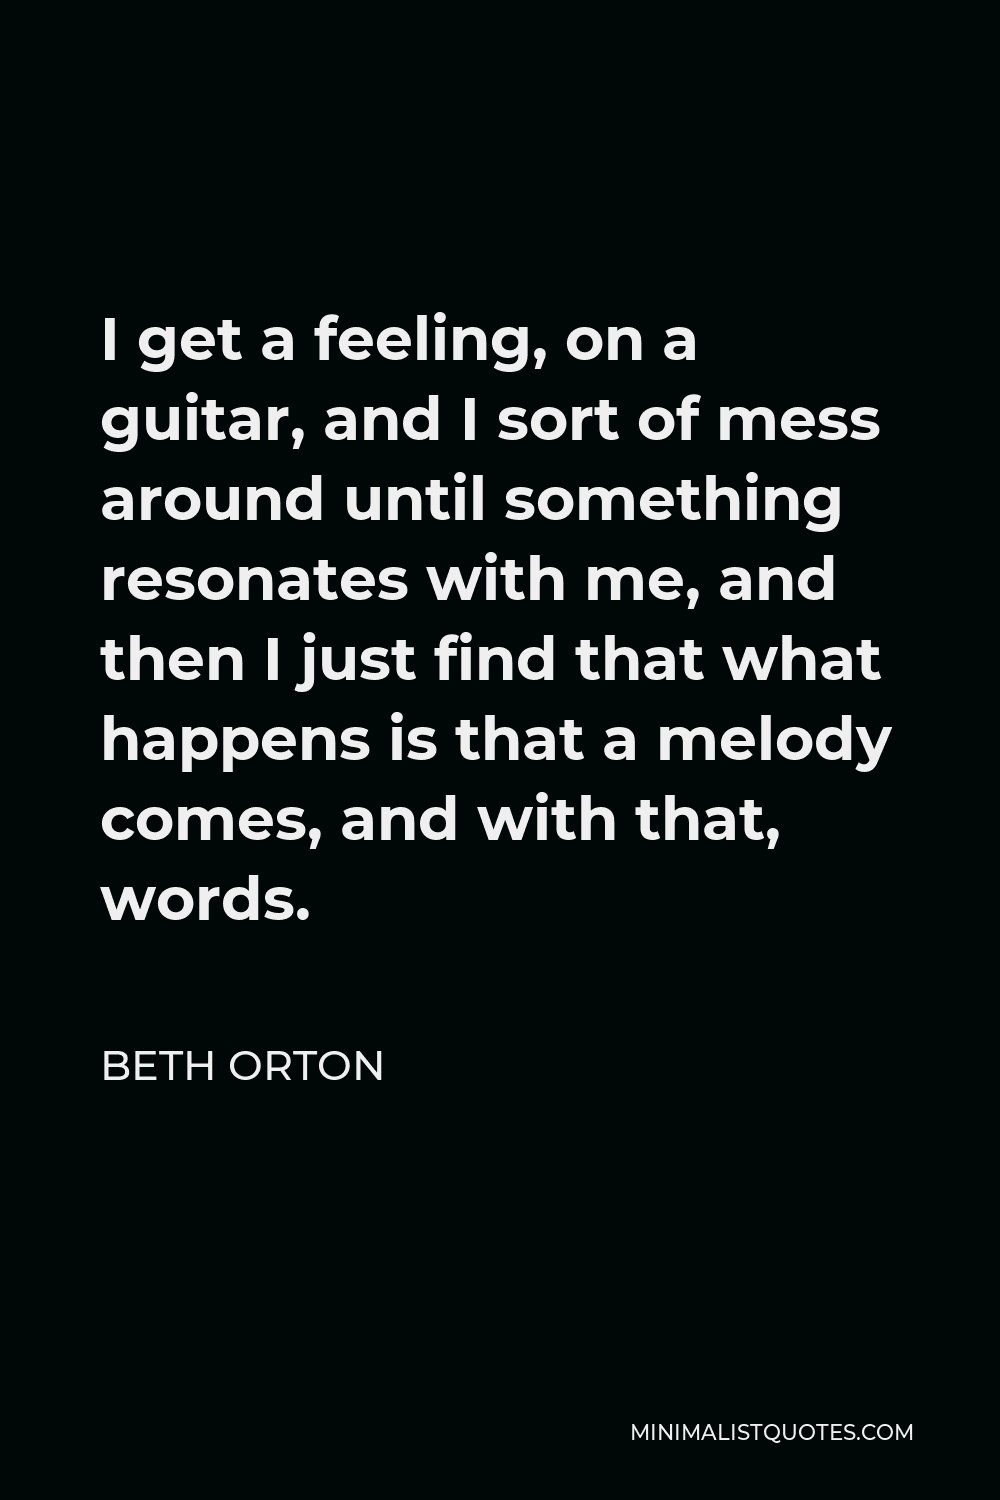 Beth Orton Quote - I get a feeling, on a guitar, and I sort of mess around until something resonates with me, and then I just find that what happens is that a melody comes, and with that, words.